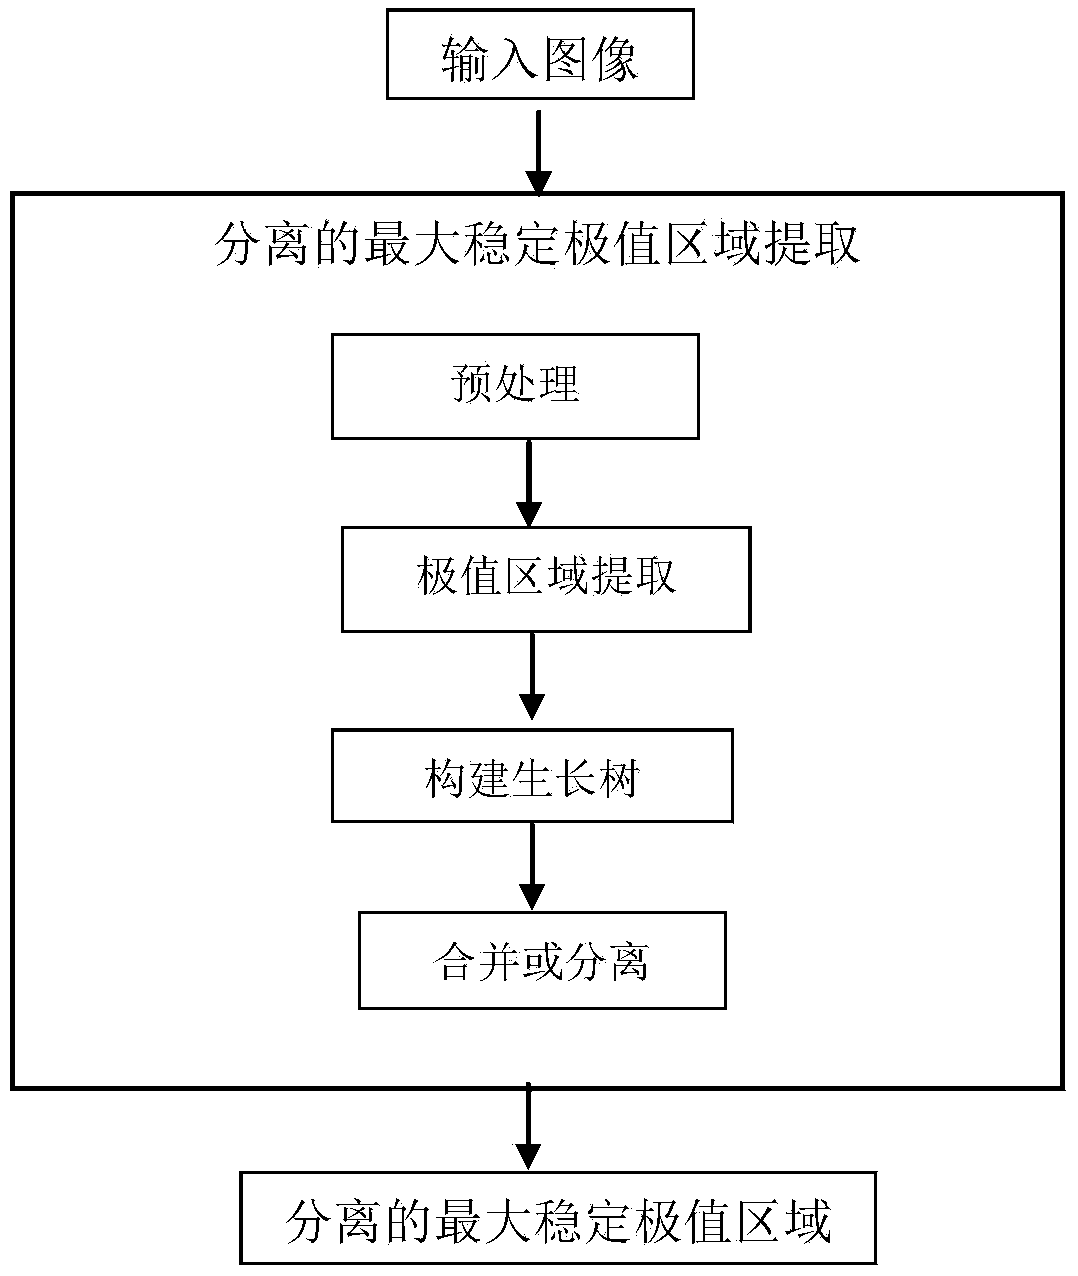 Extremum connected domain based Chinese character detection method in natural scene image